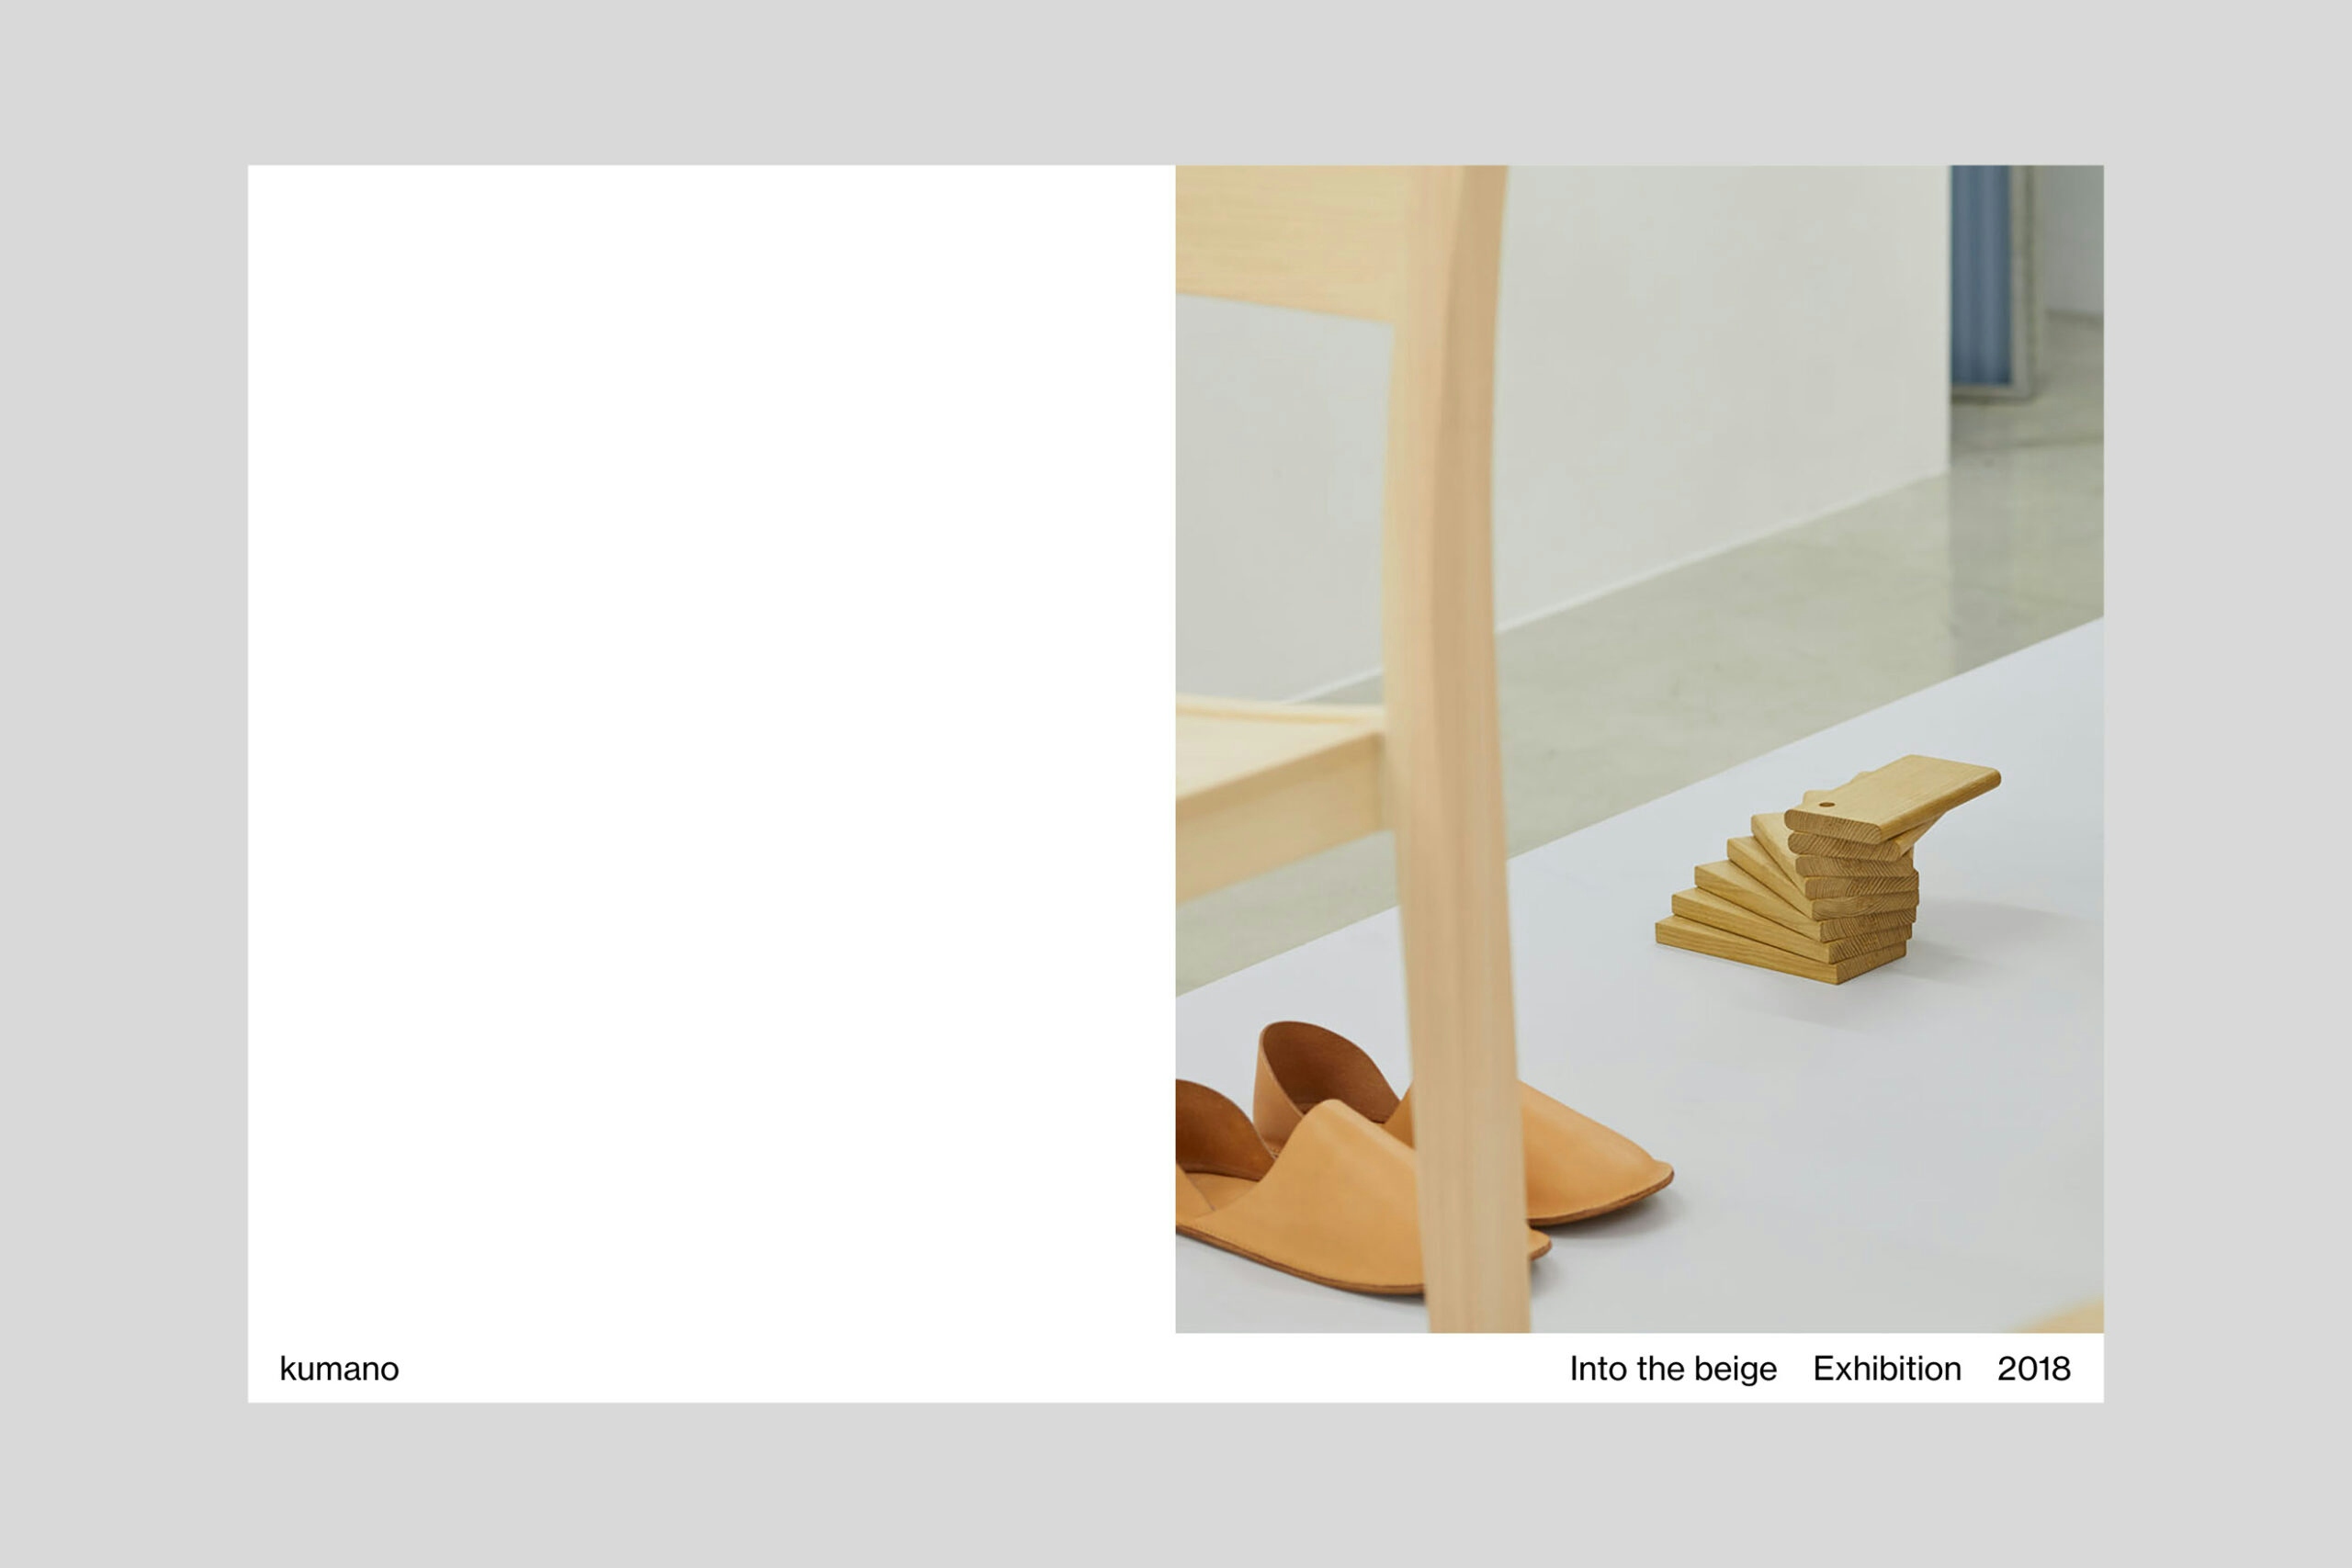 Wataru Kumano web layout showing wooden furniture and a pair of leather slippers